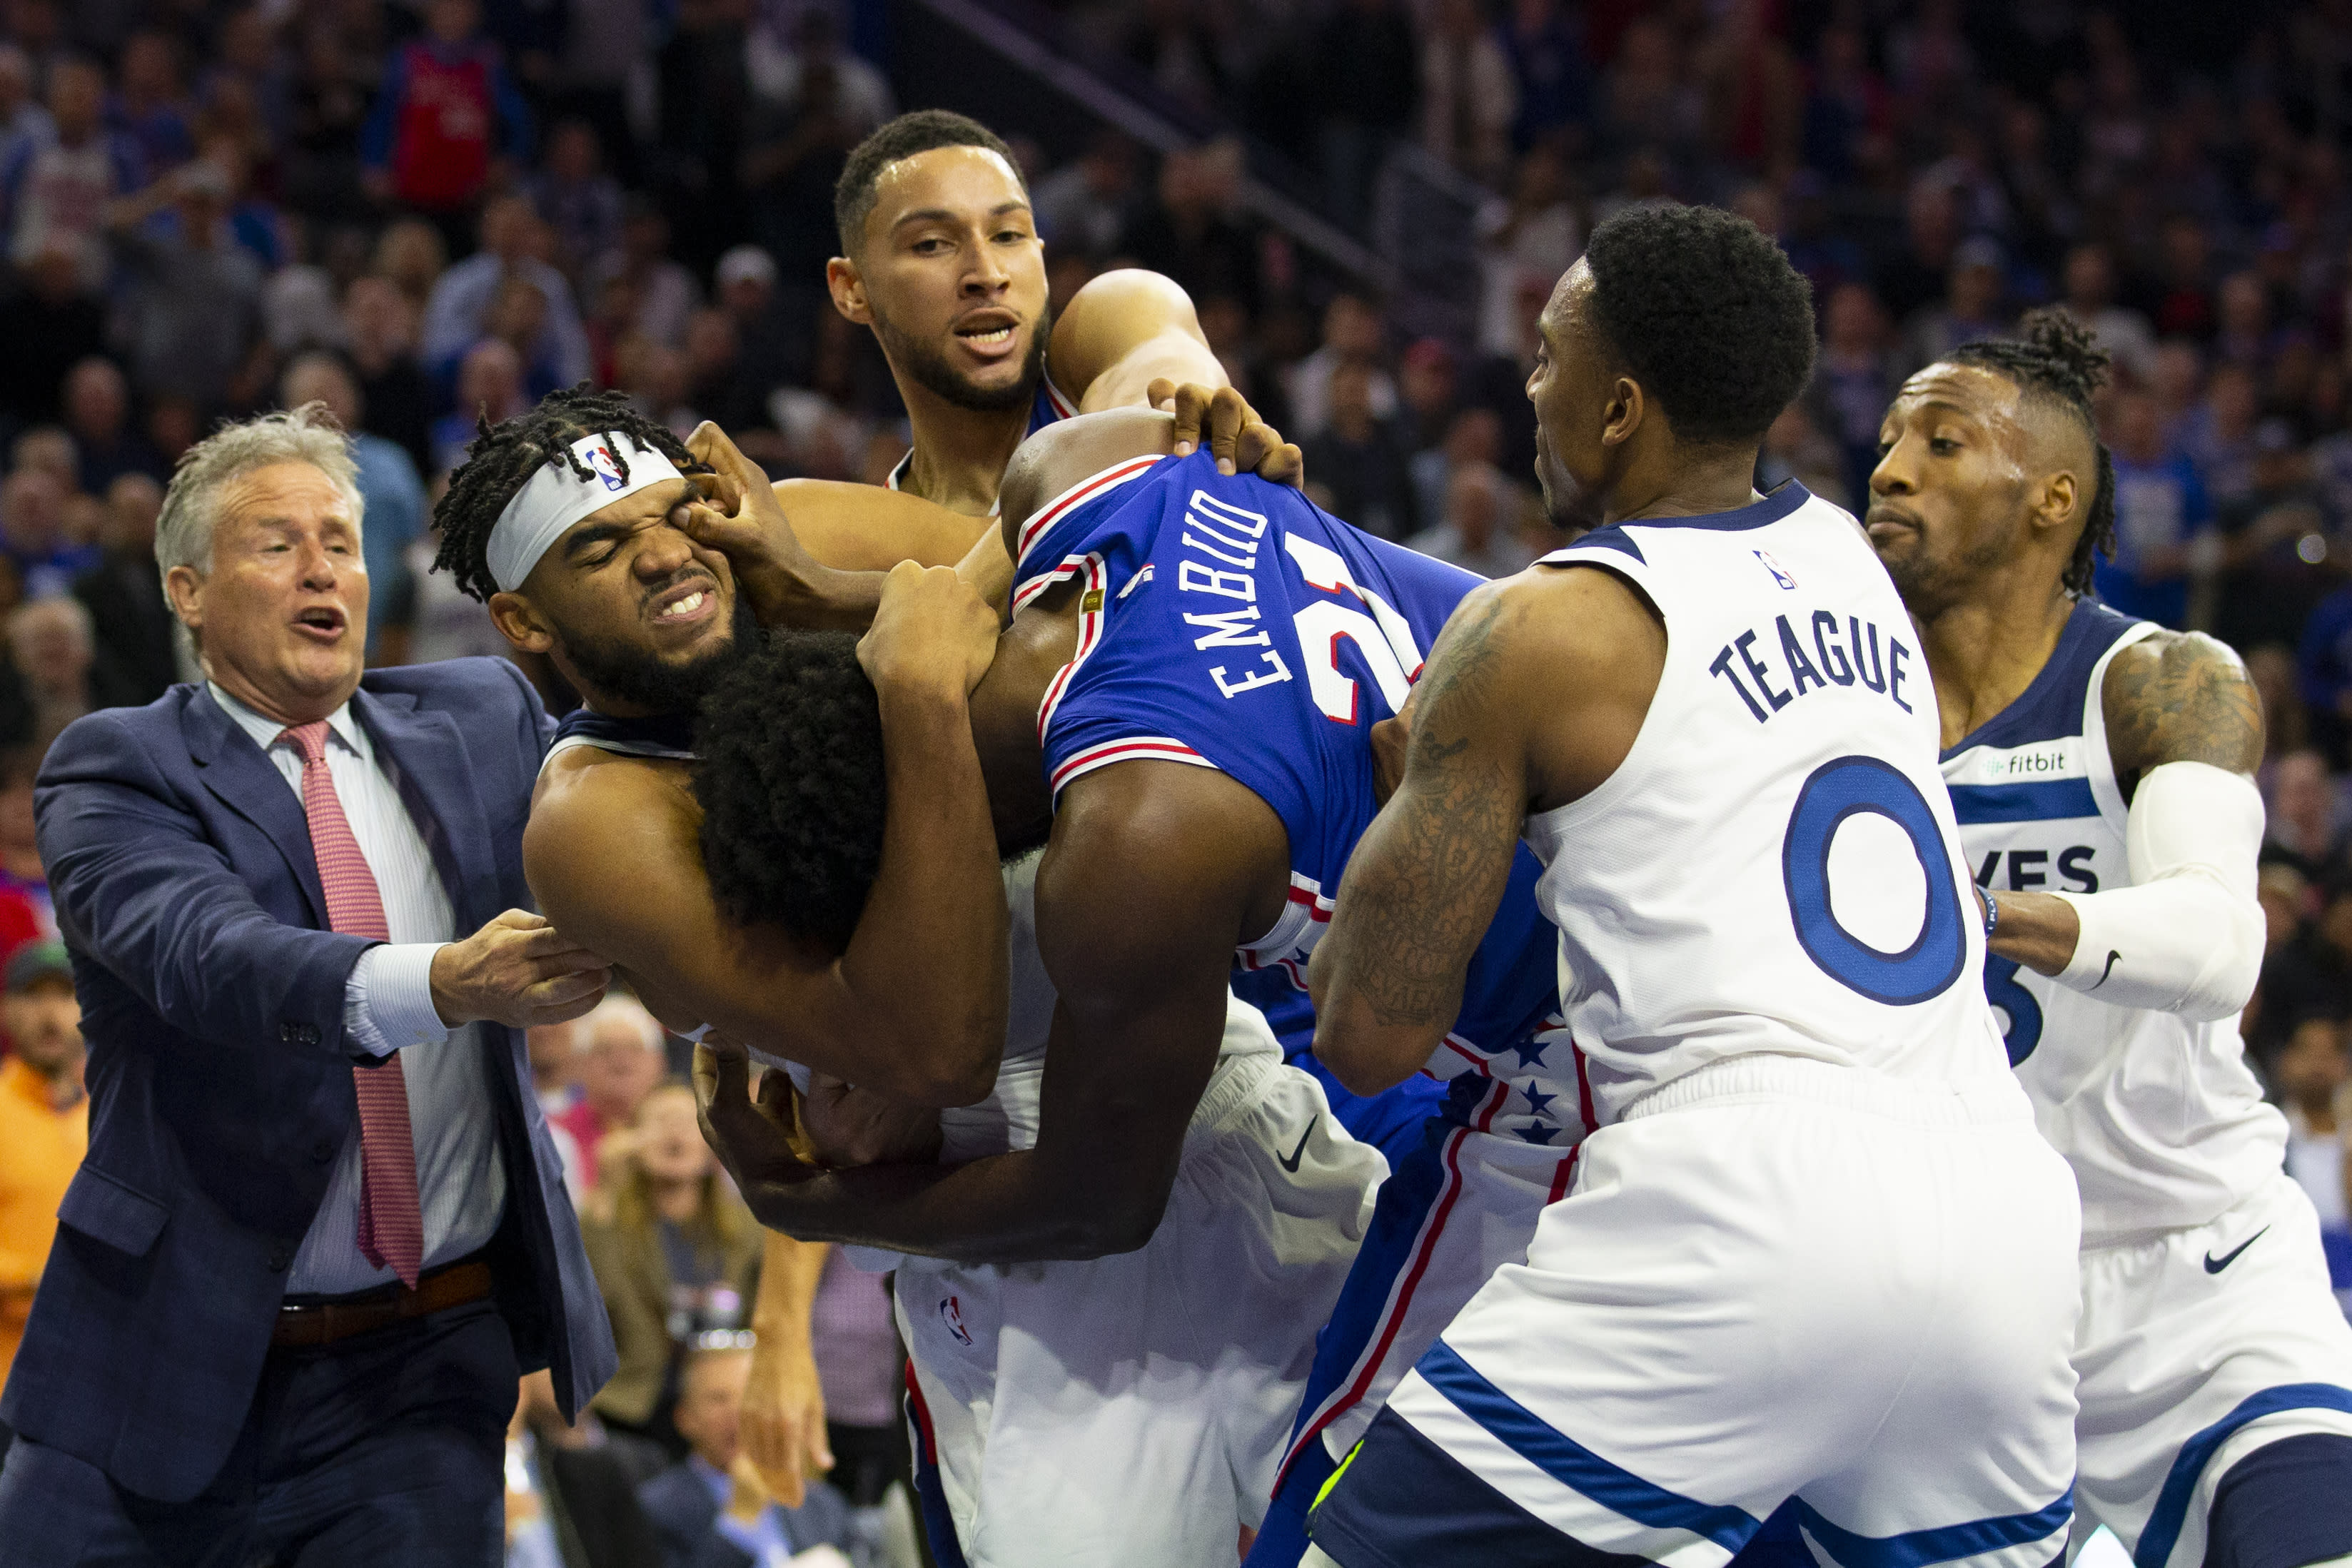 Joel Embiid and Karl-Anthony Towns fight: What happened